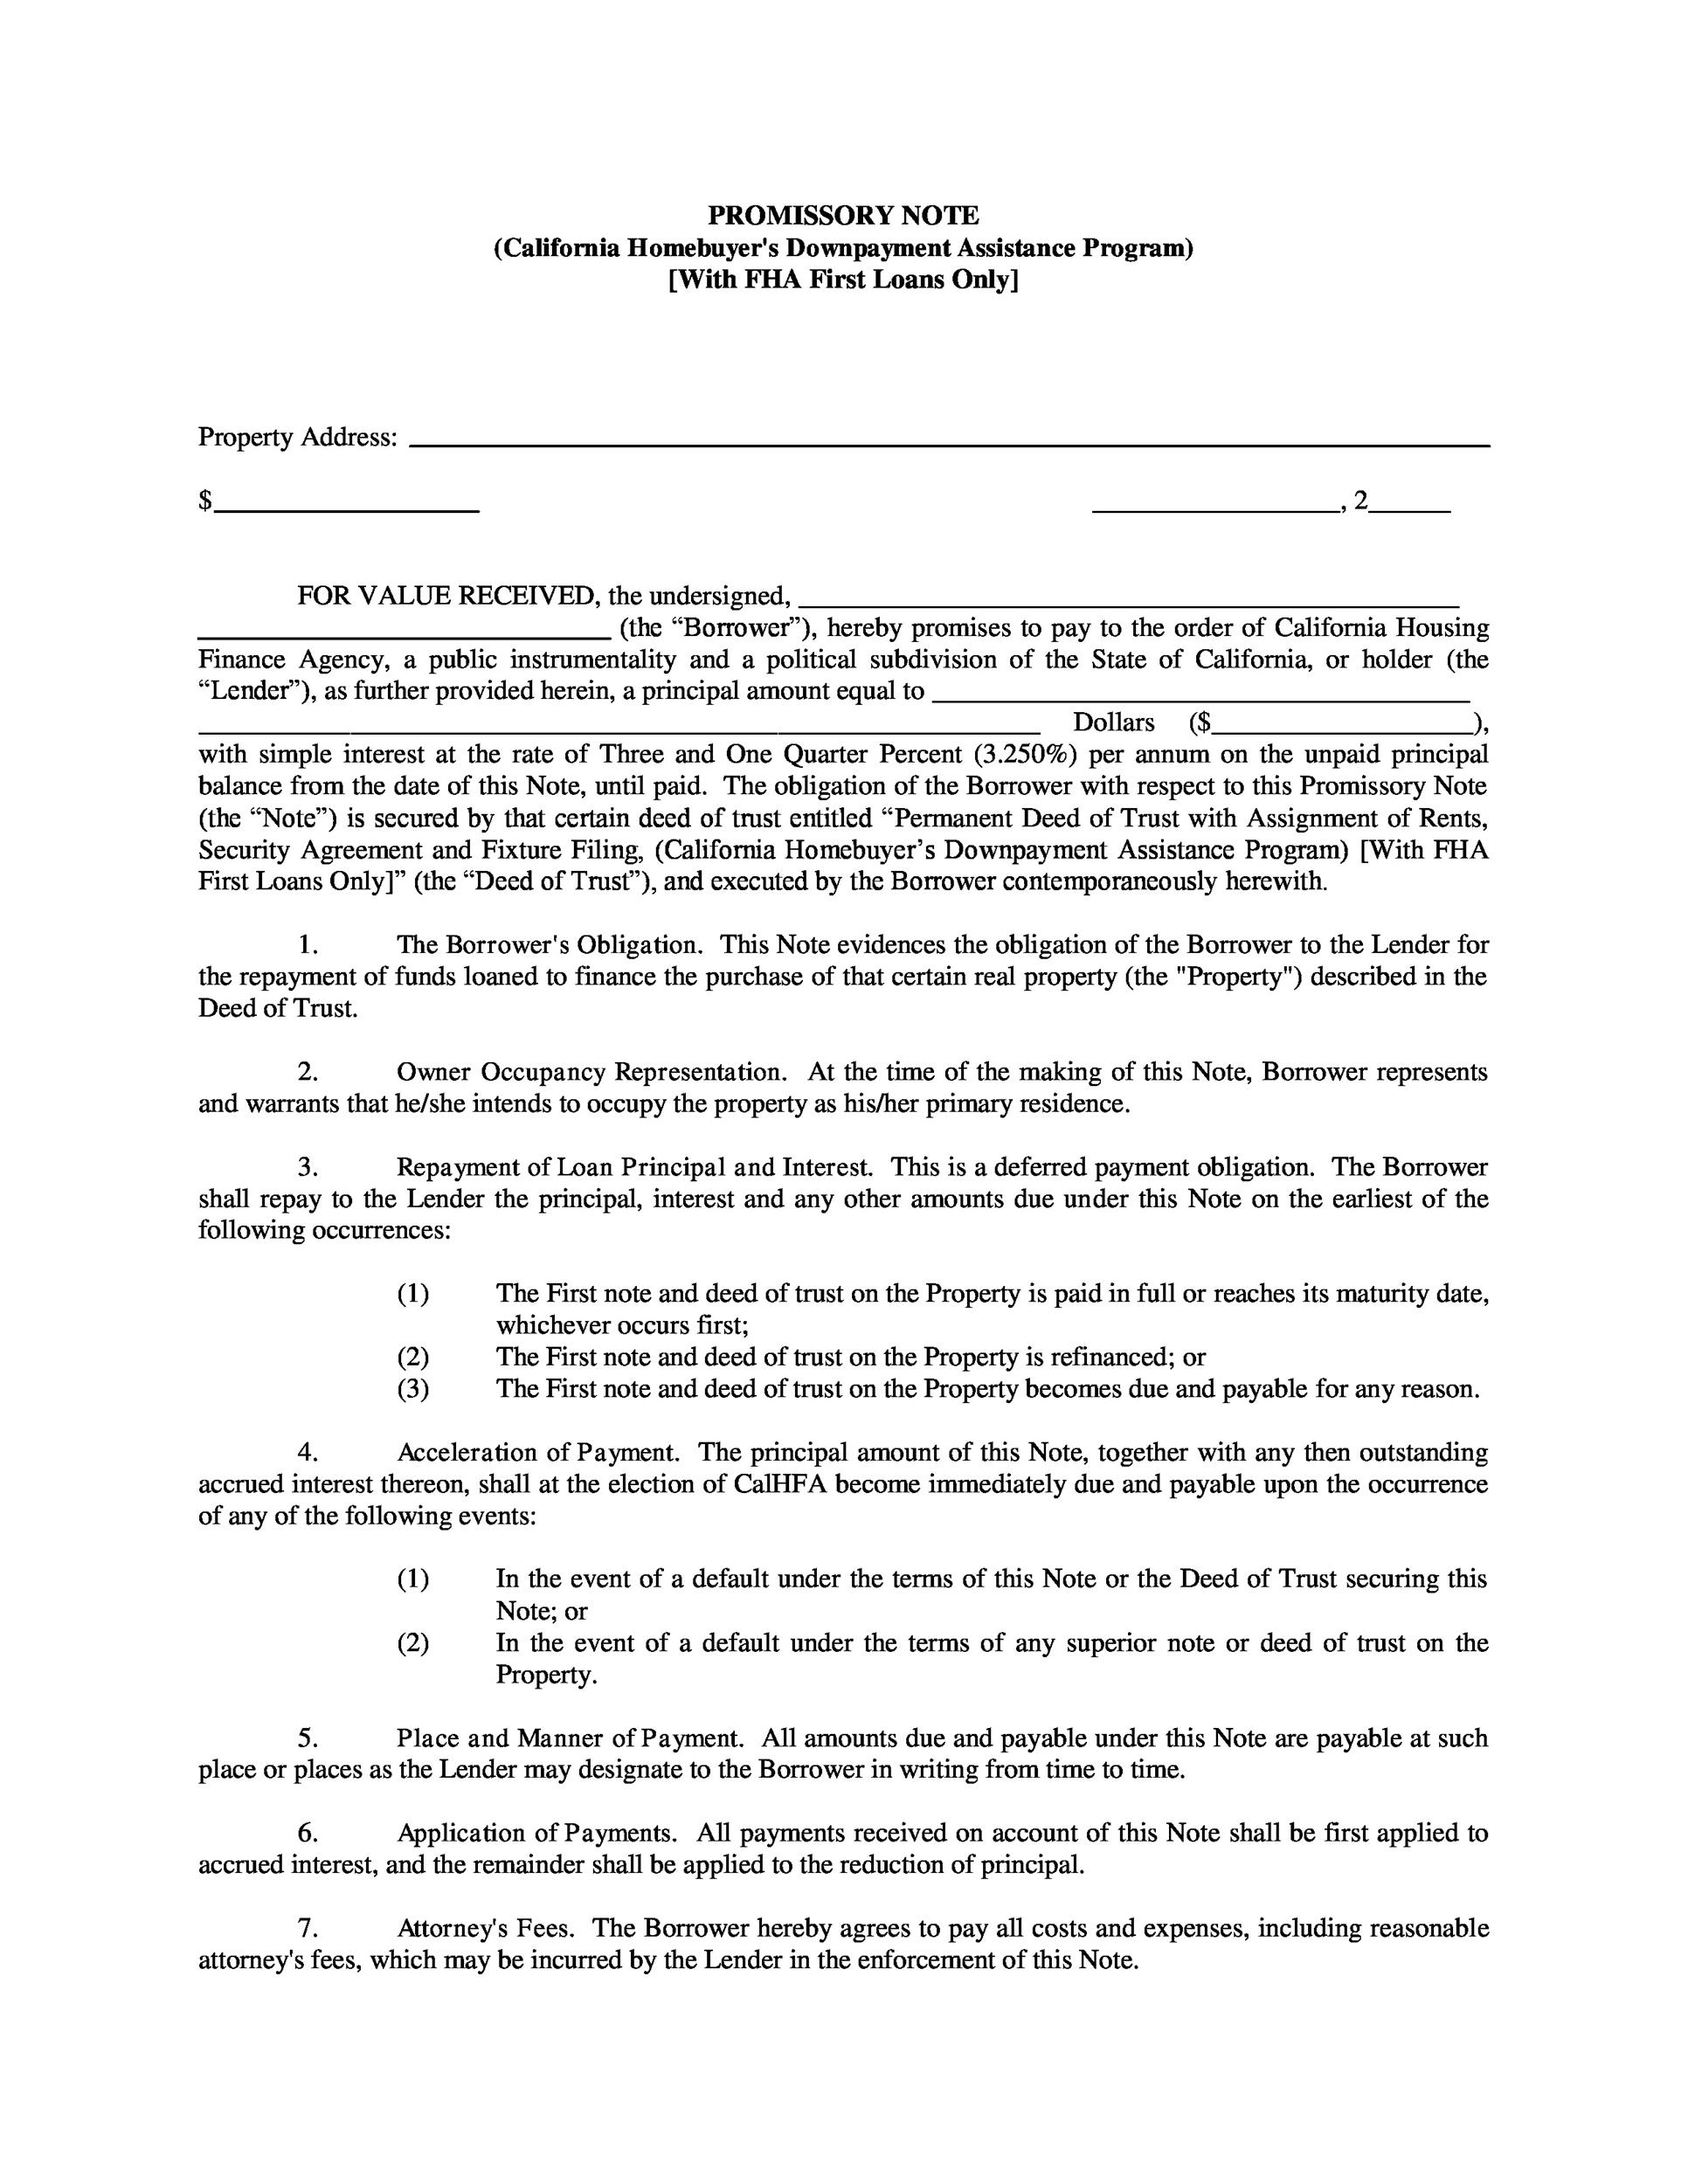 Free promissory note template 12